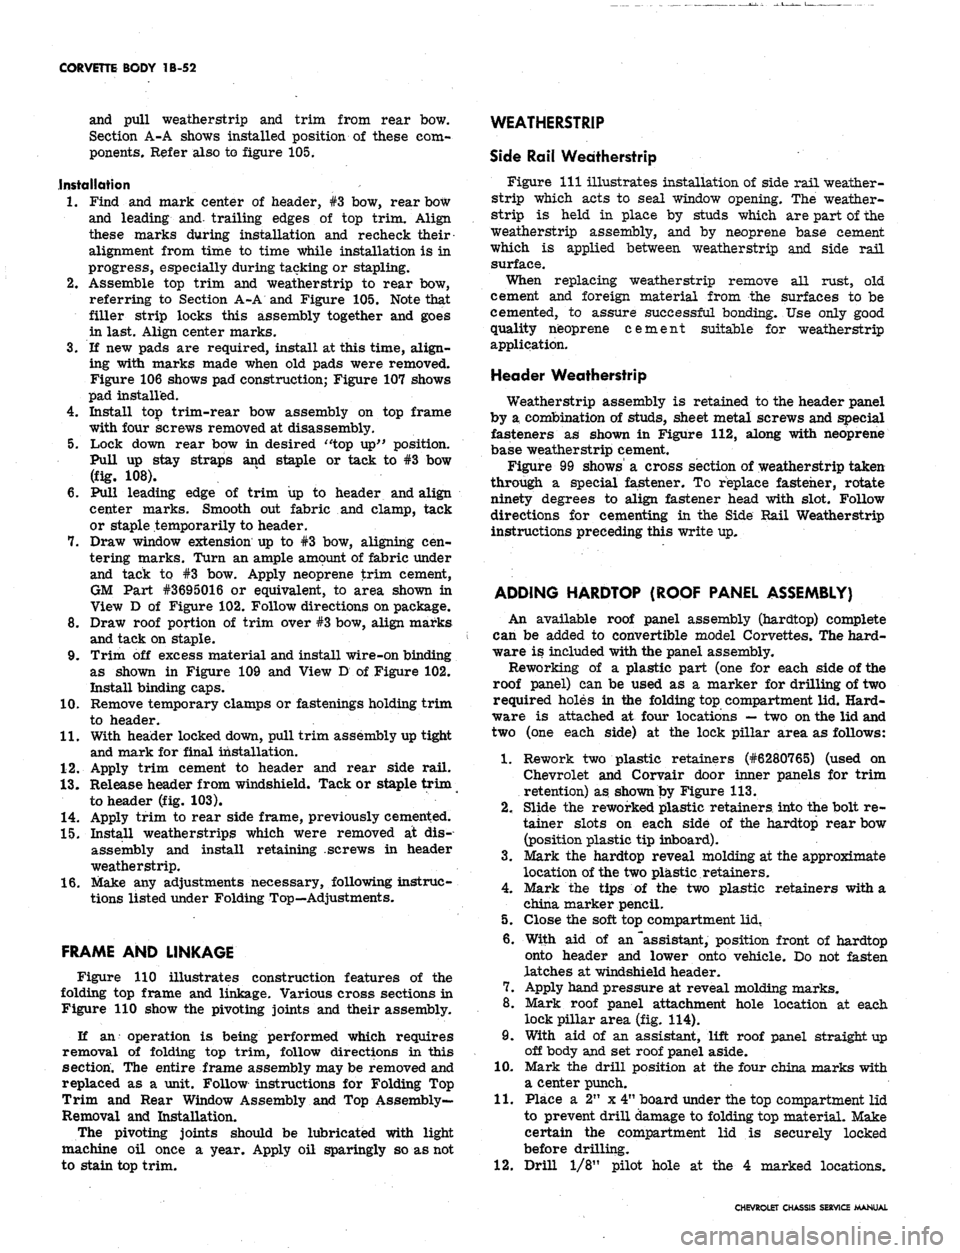 CHEVROLET CAMARO 1967 1.G Chassis Workshop Manual 
CORVETTE BODY 1B-52

and pull weatherstrip and trim from rear bow.

Section A-A shows installed position of these com-

ponents. Refer also to figure 105.

installation

1.
 Find and mark center of h